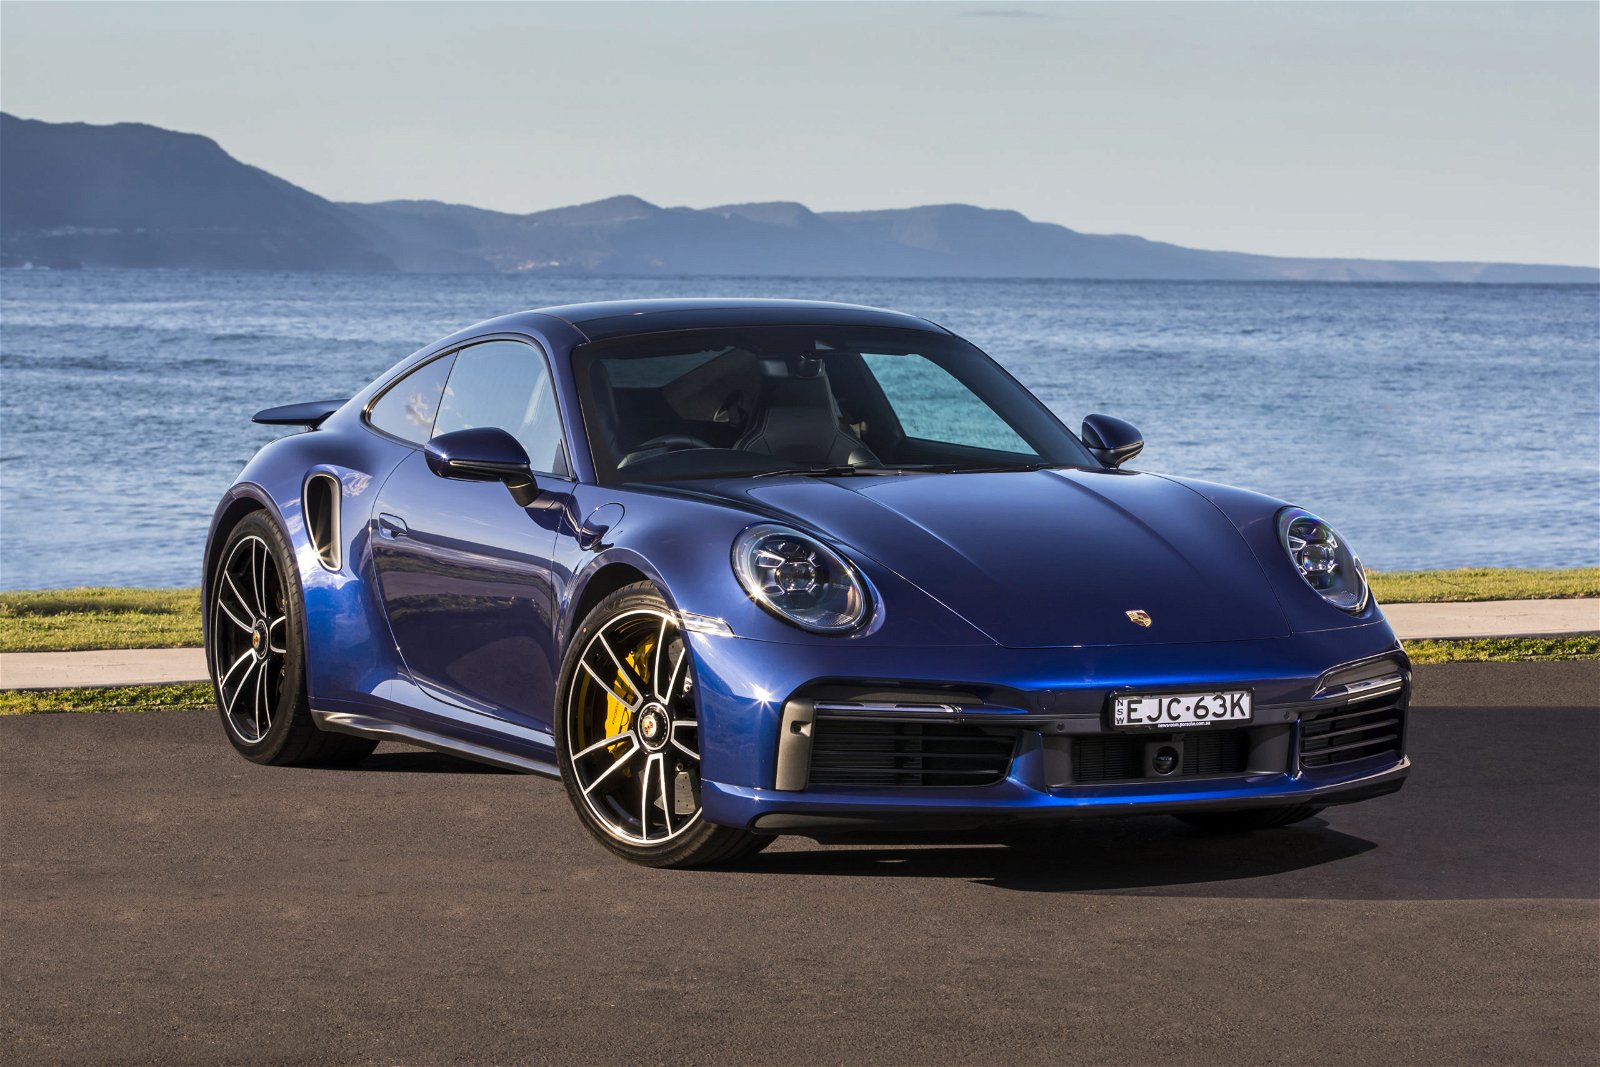 REVIEW: 2021 Porsche 911 Turbo S Coupe - is the best car the